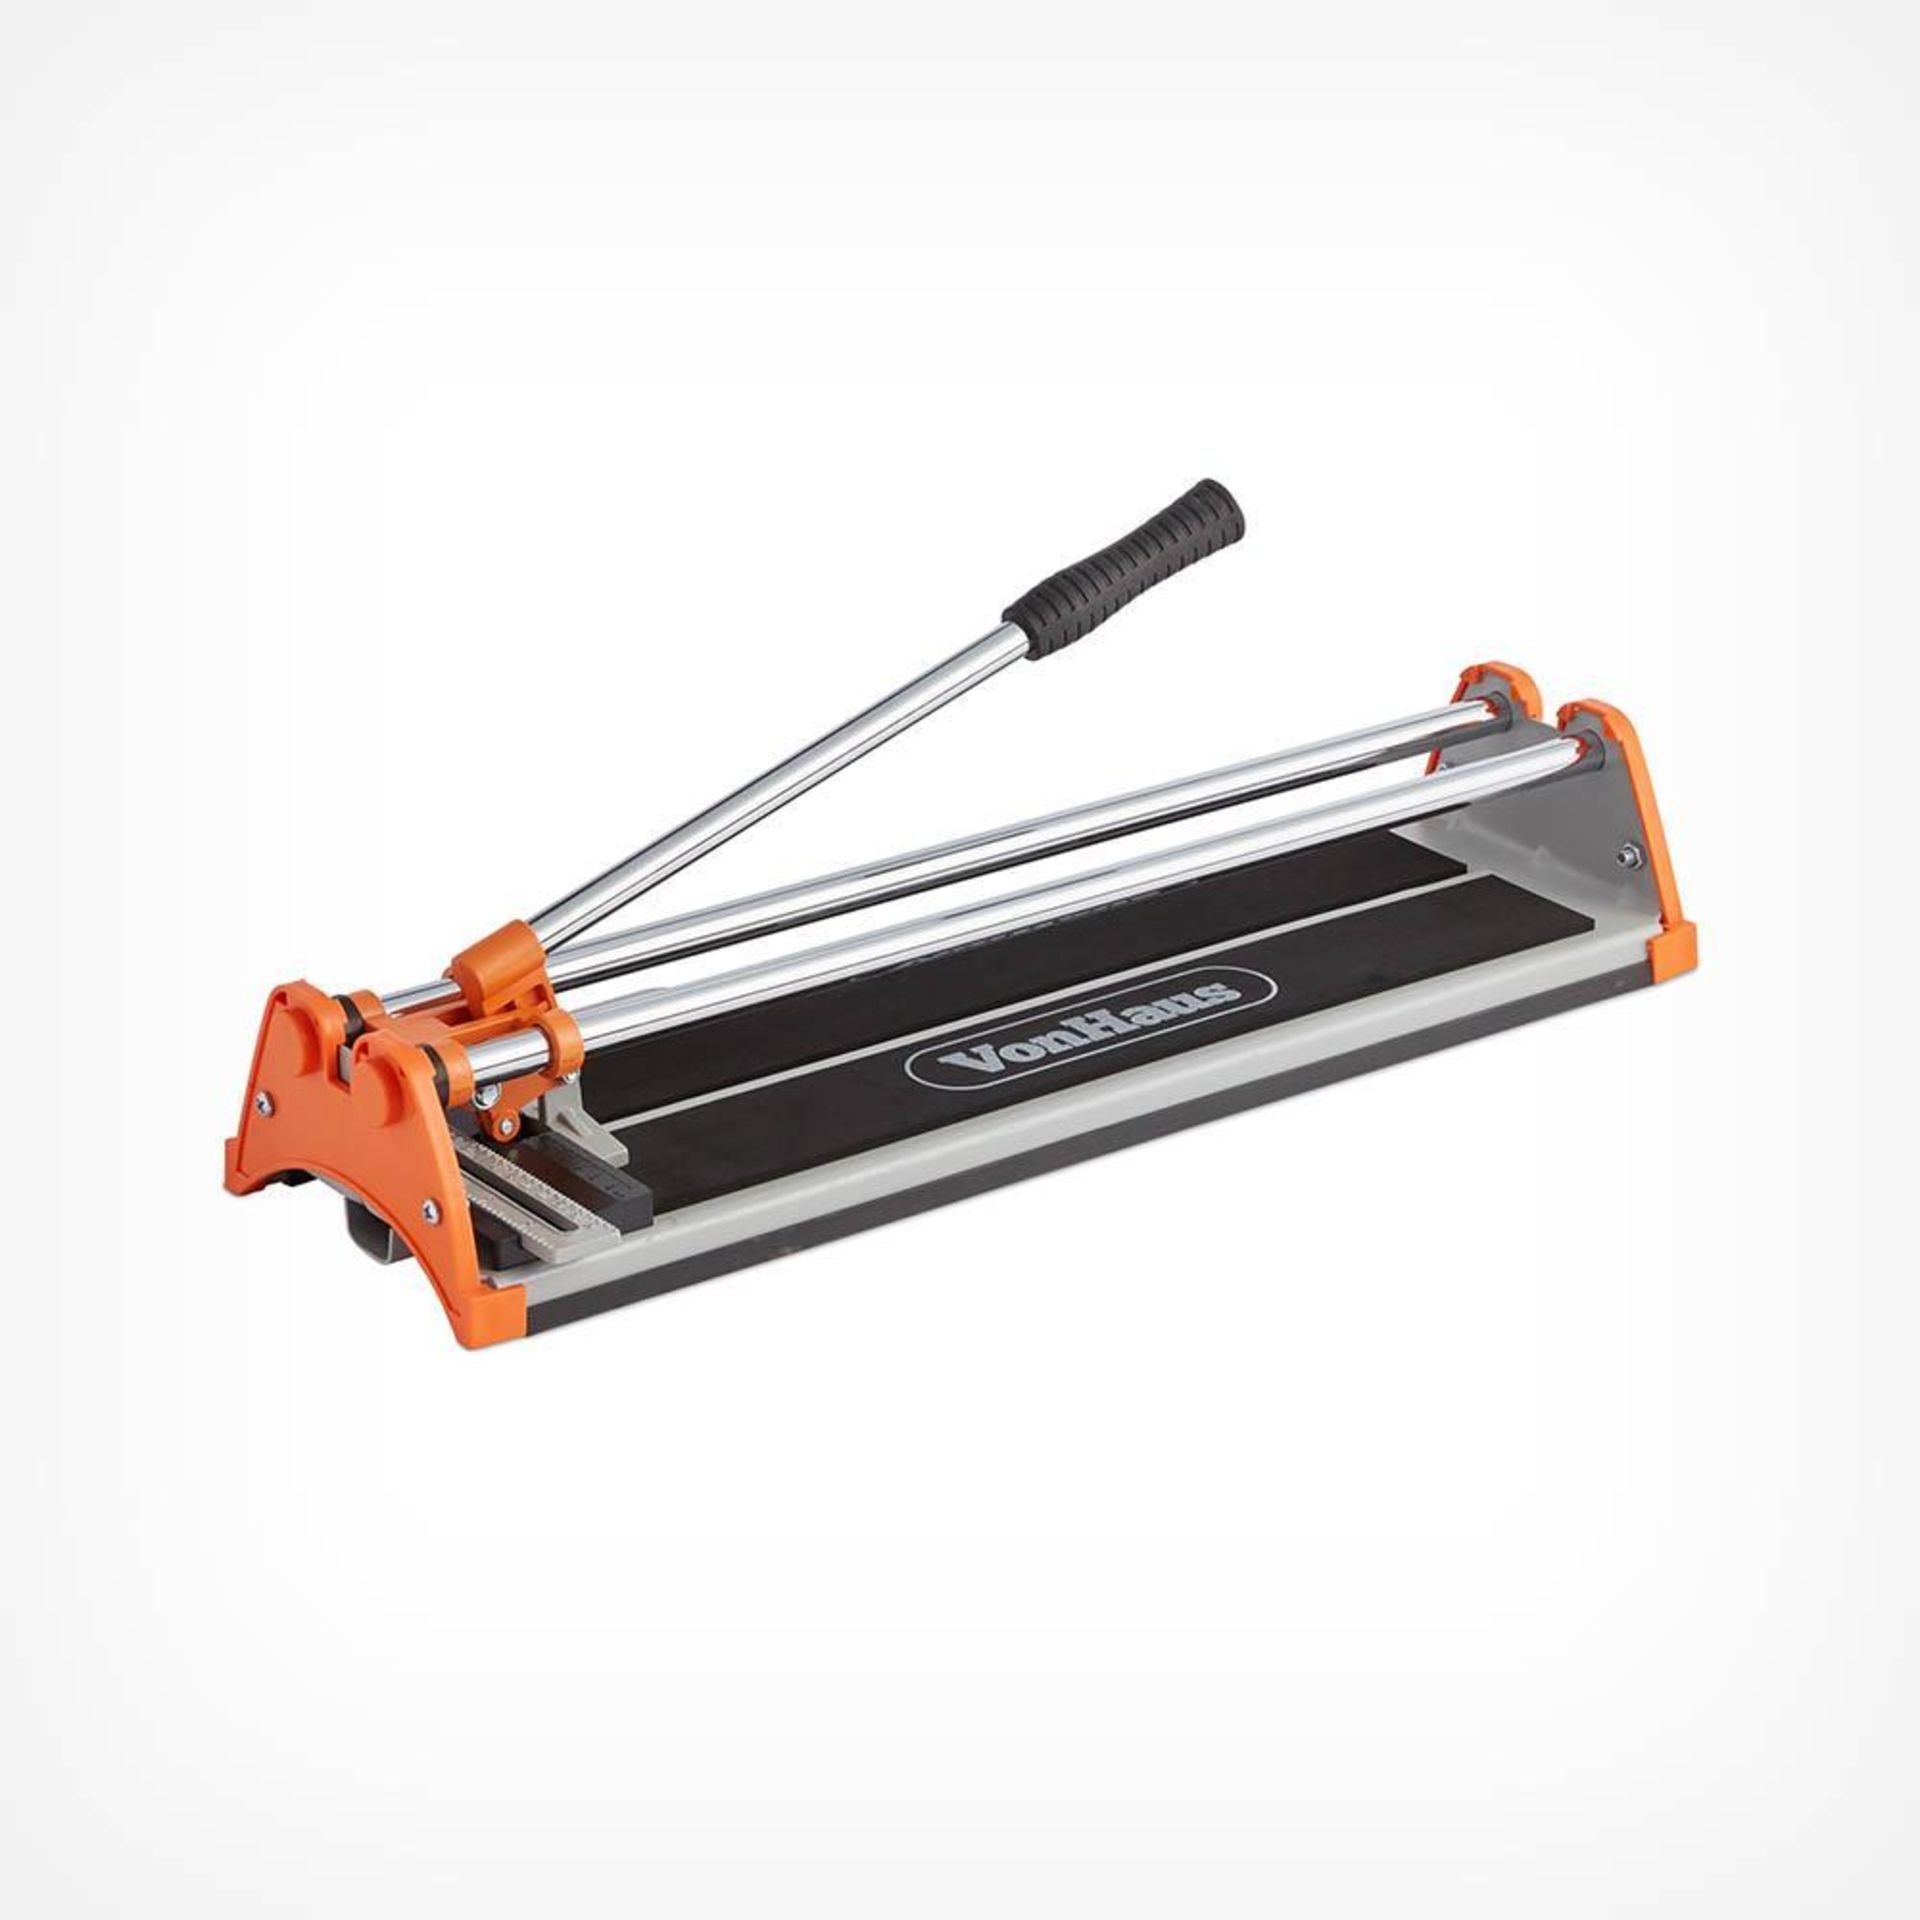 Manual Tile Cutter 430mm - S2. With its compact size, intuitive design and simple operation, this